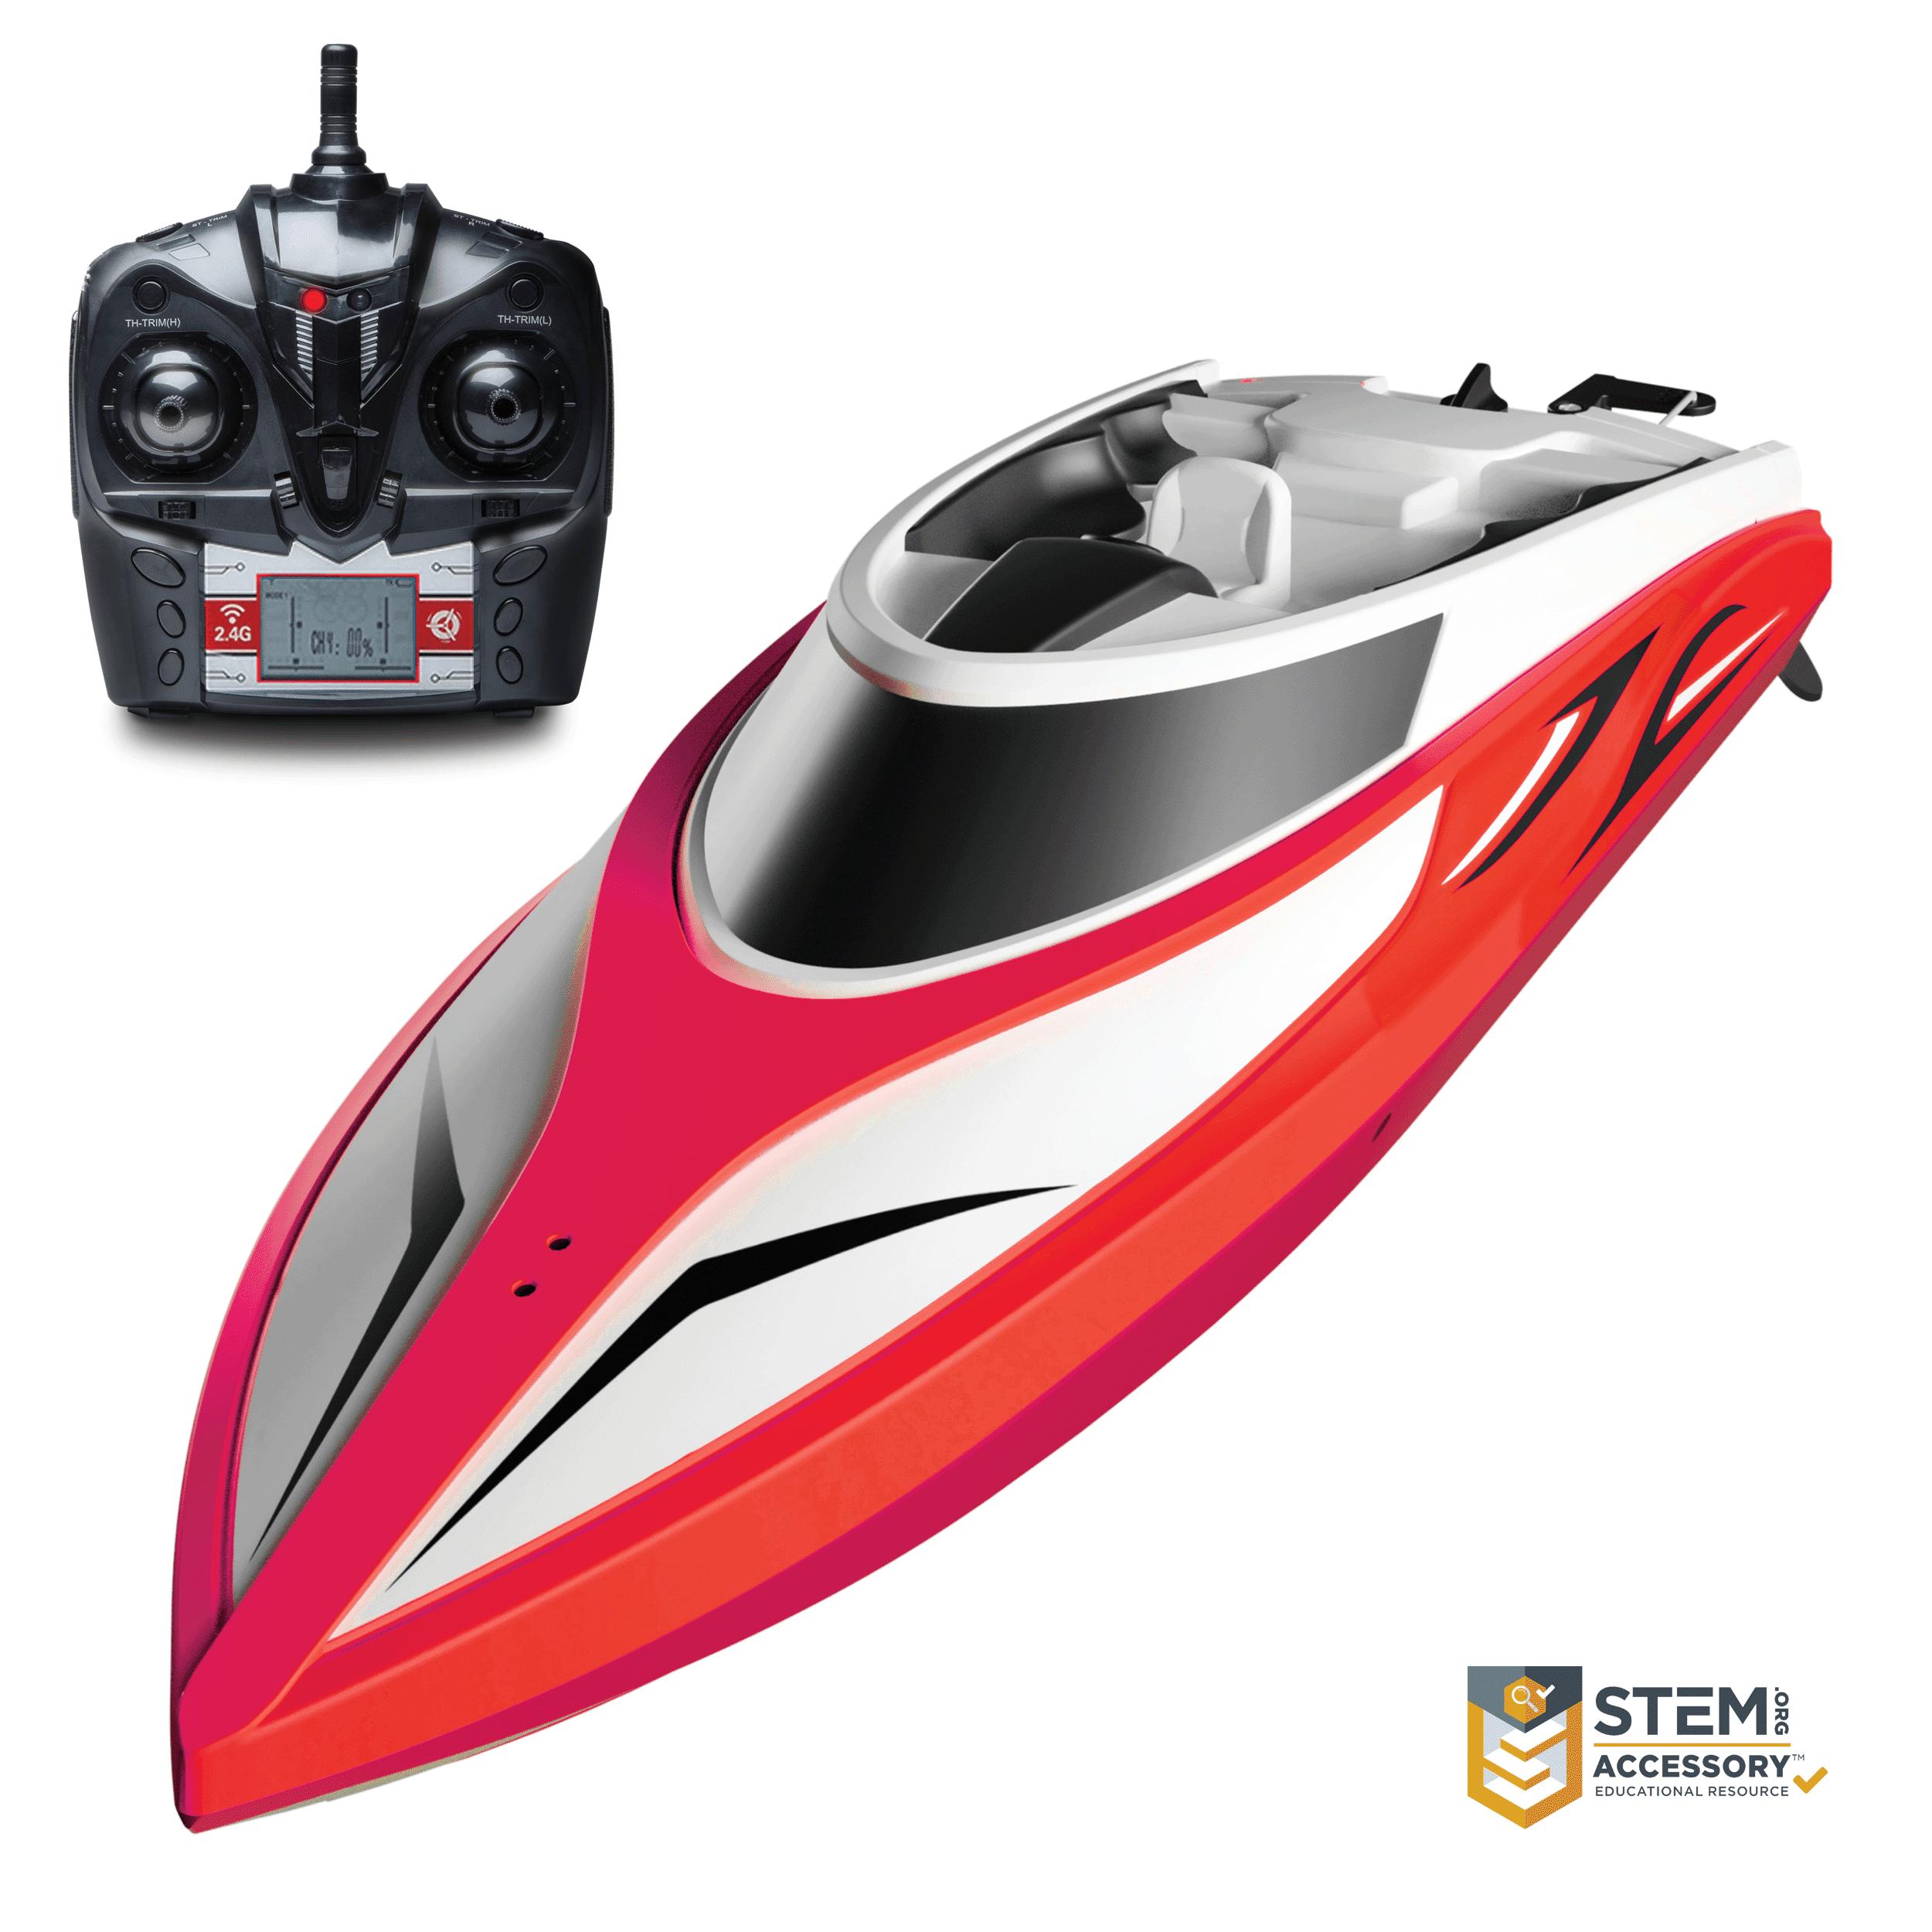 H102 Rc Boat:  RentThe H102 RC Boat with Accessories